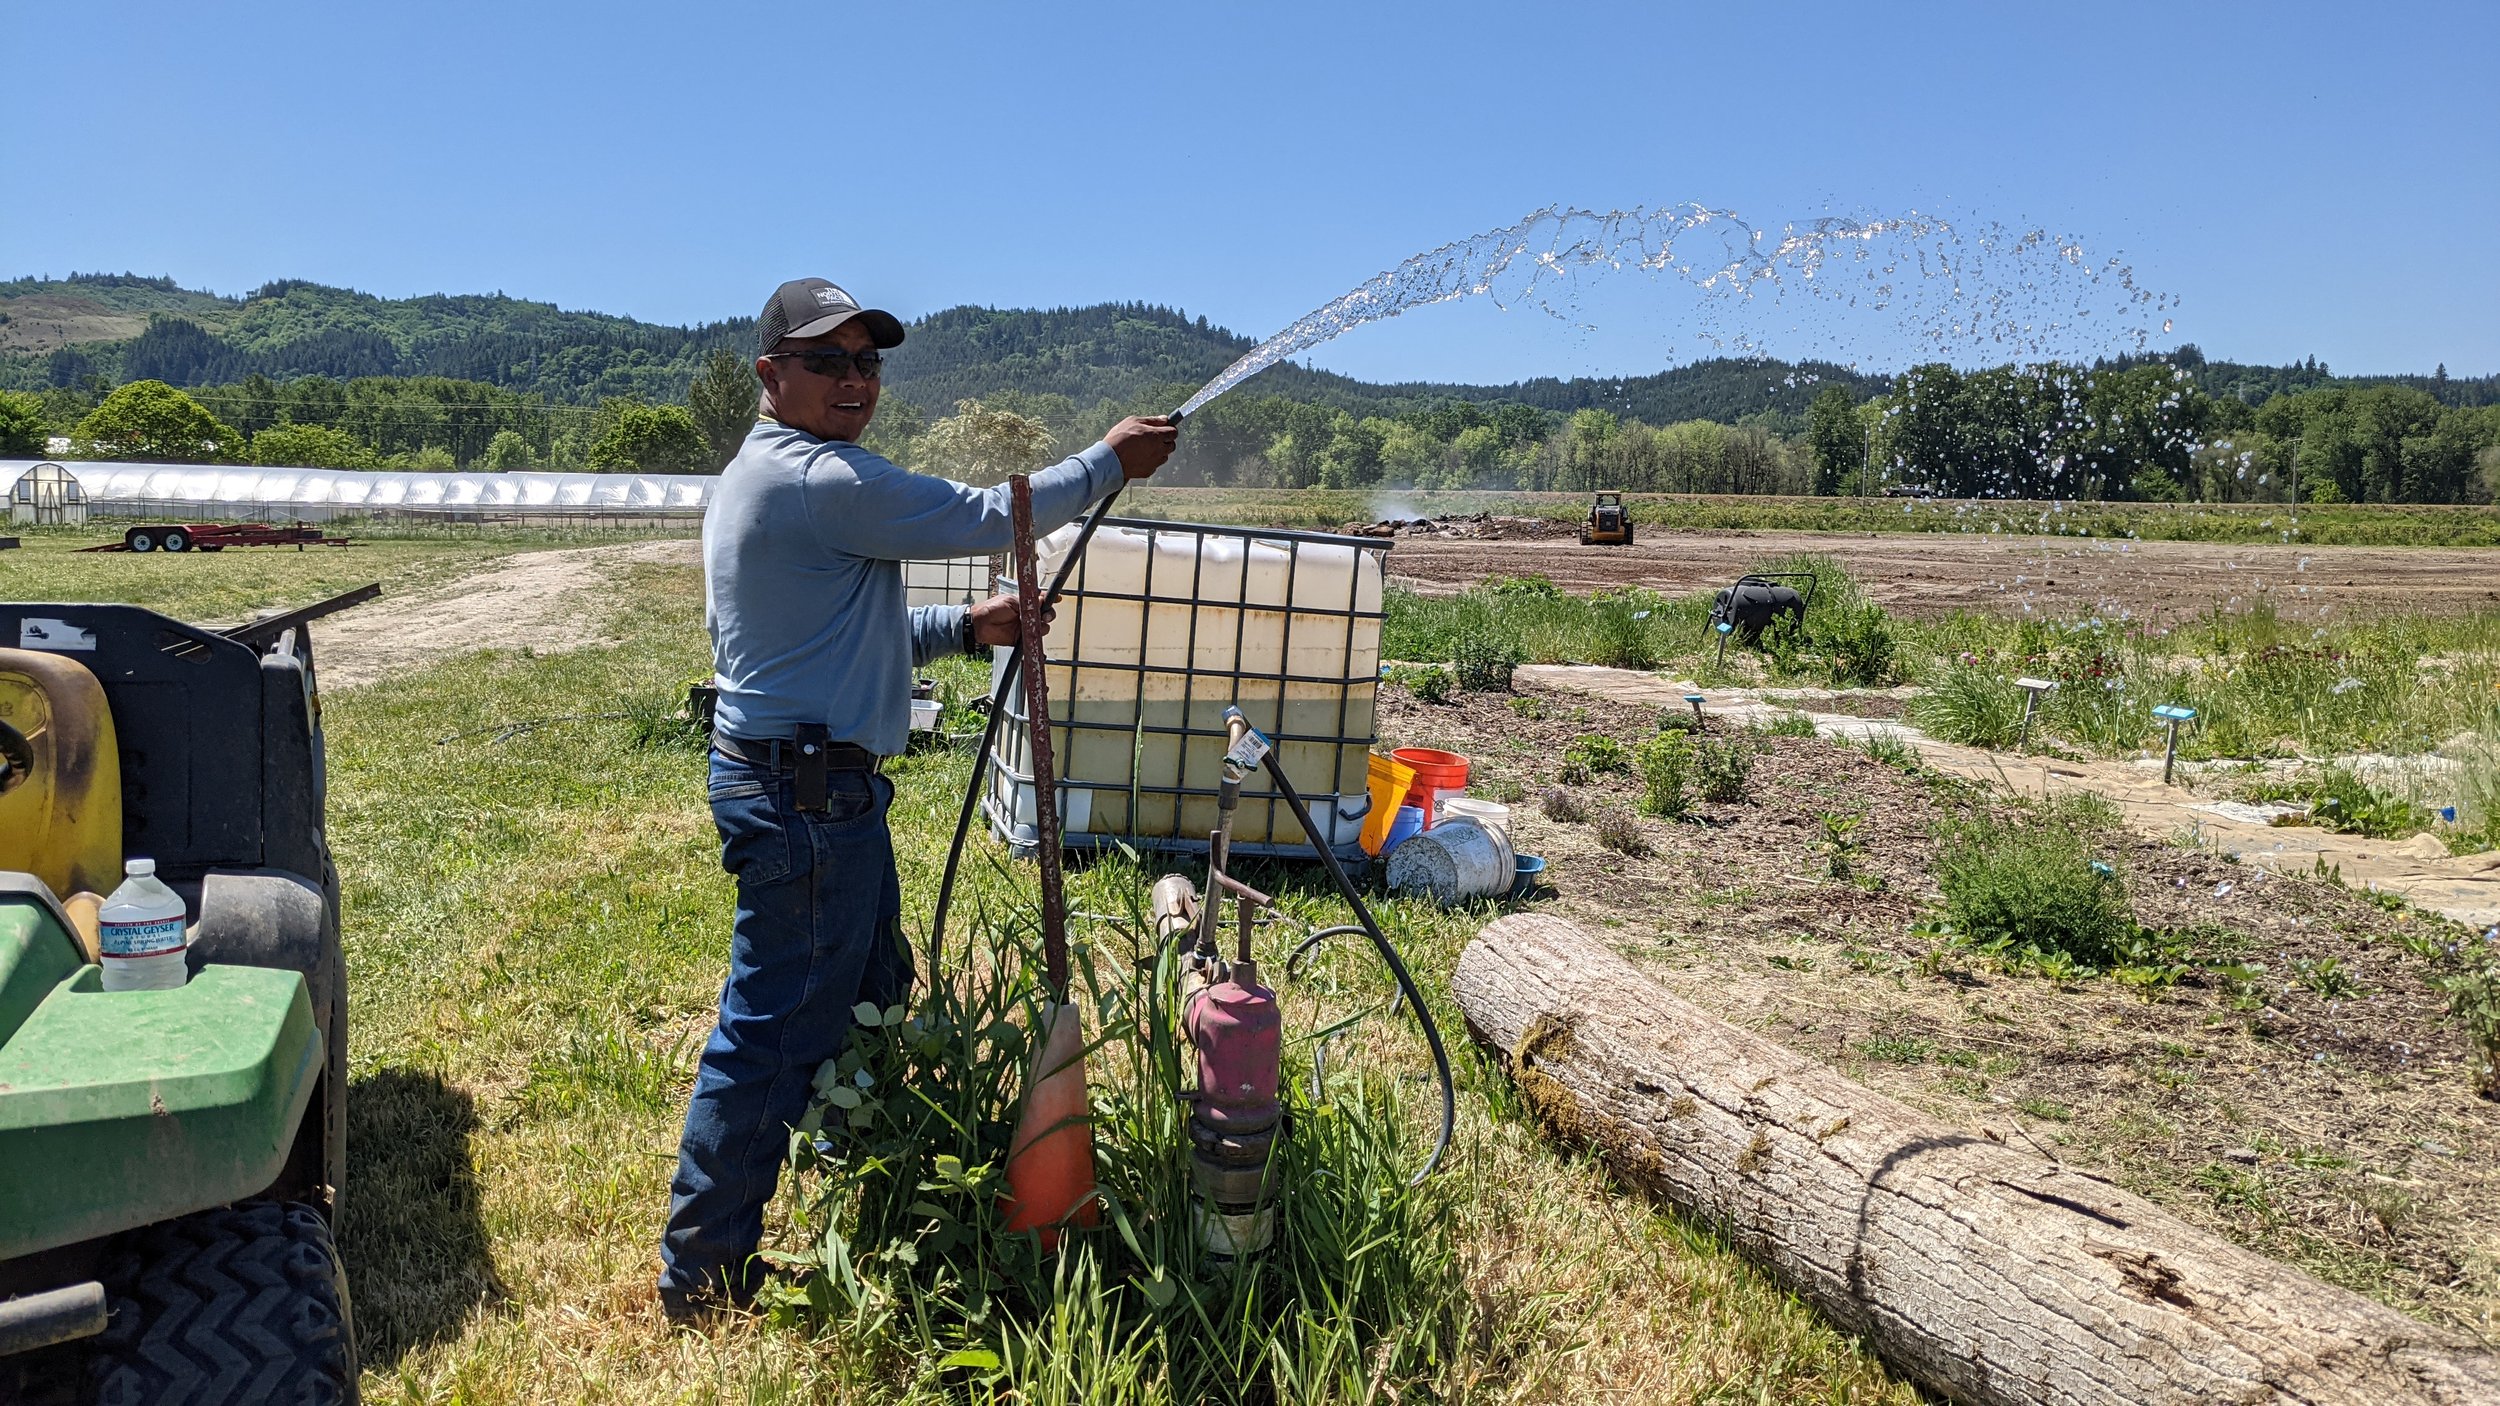  Luis setting up a water system for the Sauvie Island Center and their campers to use to water their Lunch Grow Garden. 